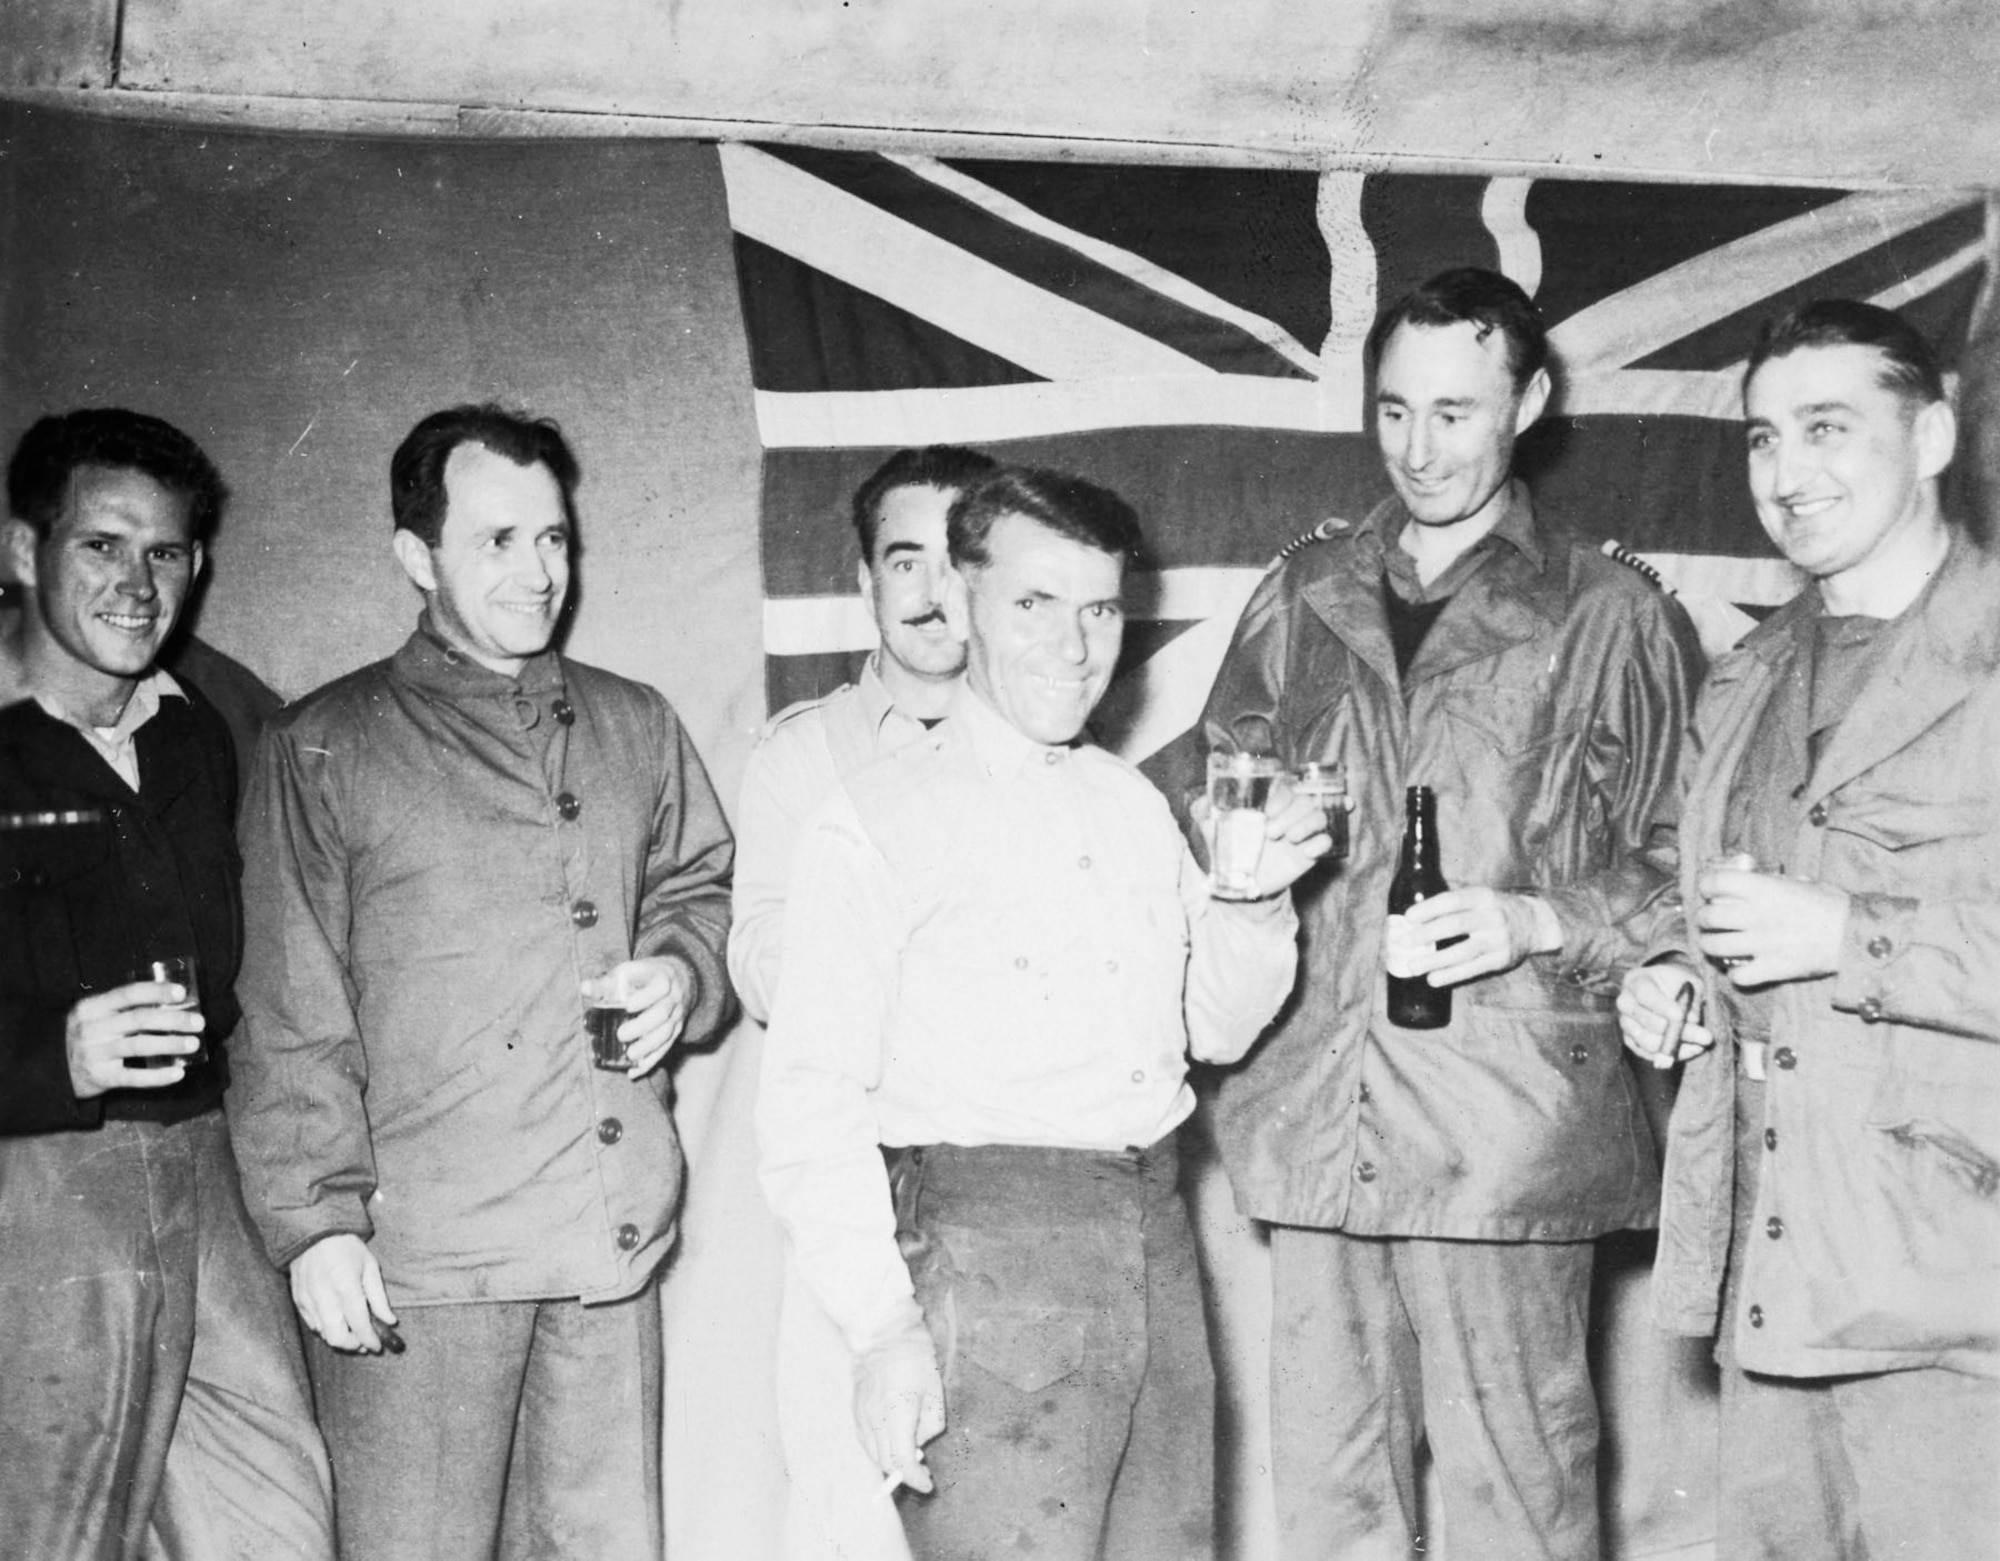 Col. Francis “Gabby” Gabreski (far right) with members of the Royal Australian Air Force No 77 Squadron. Gabreski was the commander of the F-86-equipped 51st Fighter-Interceptor Wing, and an ace in World War II and in Korea. (U.S. Air Force photo)